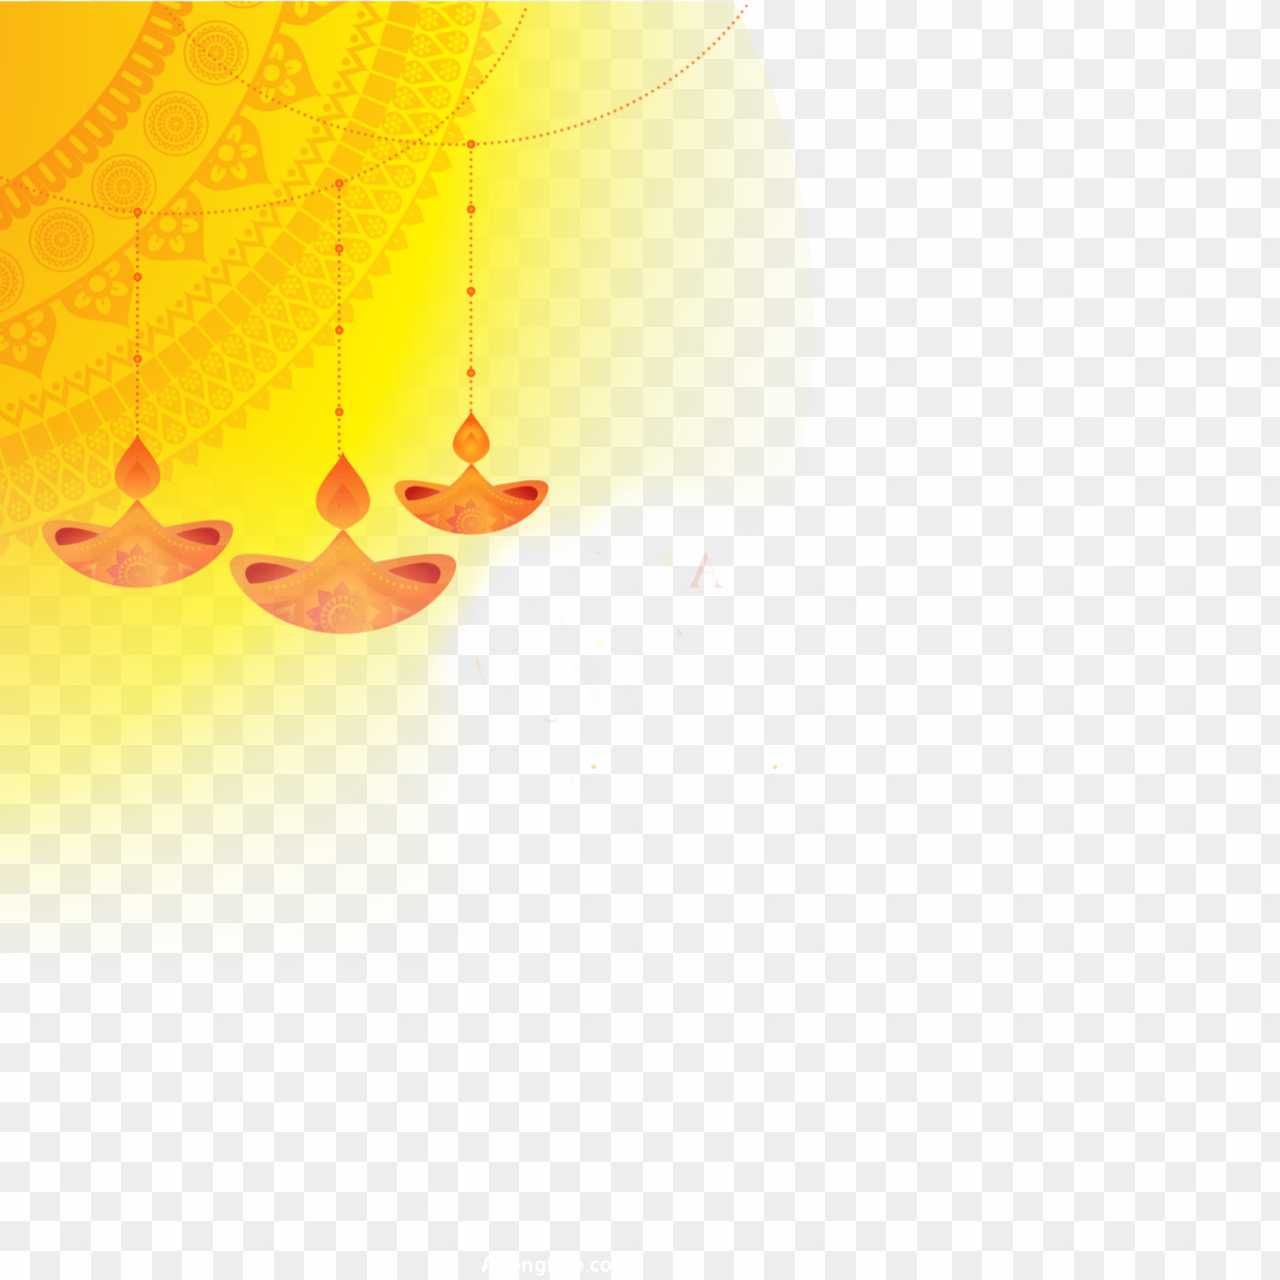 Happy Diwali background editing PNG images 